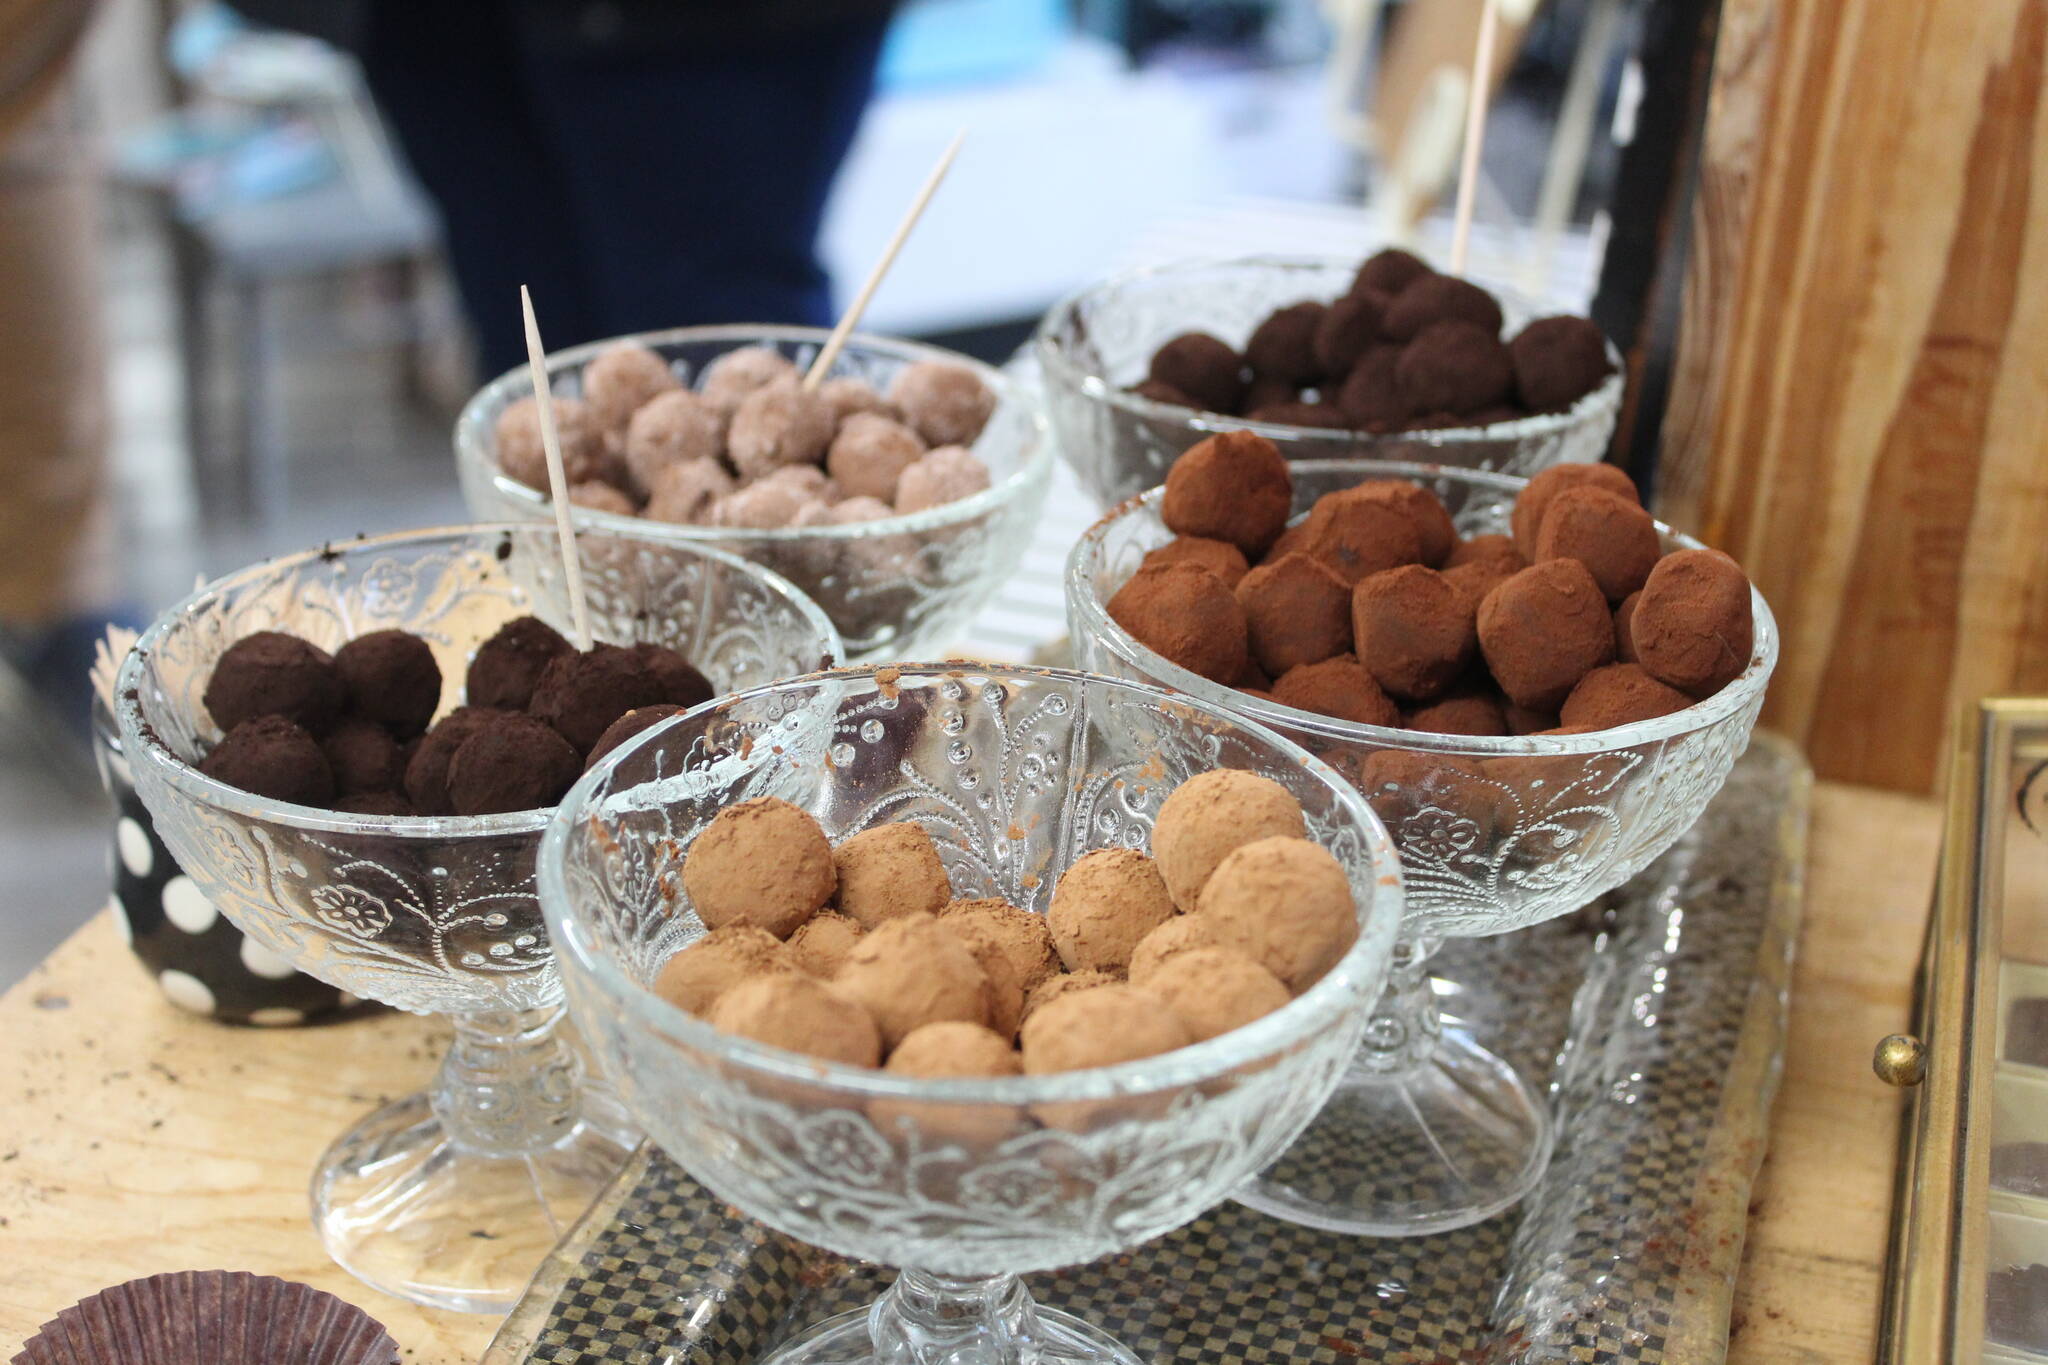 Photo by Bailey Jo Josie/Sound Publishing.
Trevani Truffles were a hit at Sparkle Gifts